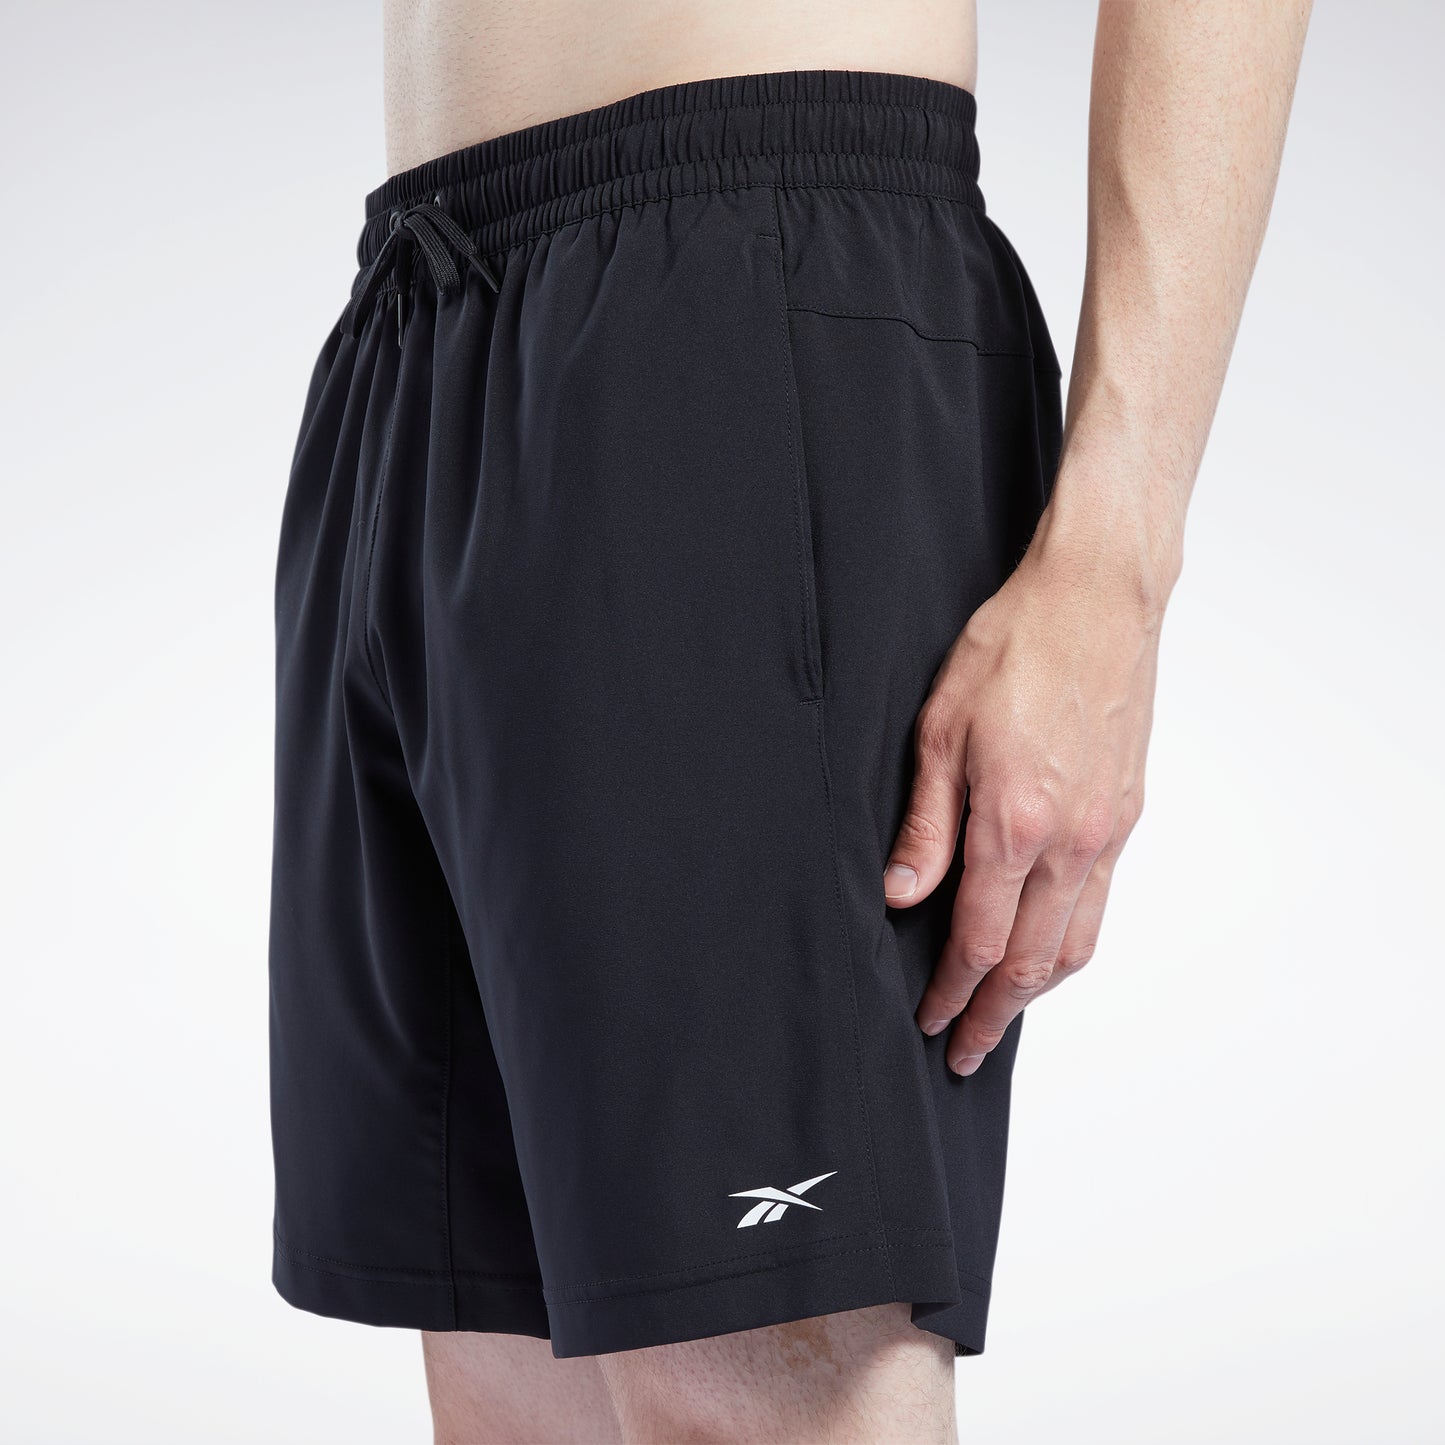  Reebok Men's Standard Speed Shorts 2.0, Black/Dark Grey/All  Over Print, X-Small : Clothing, Shoes & Jewelry